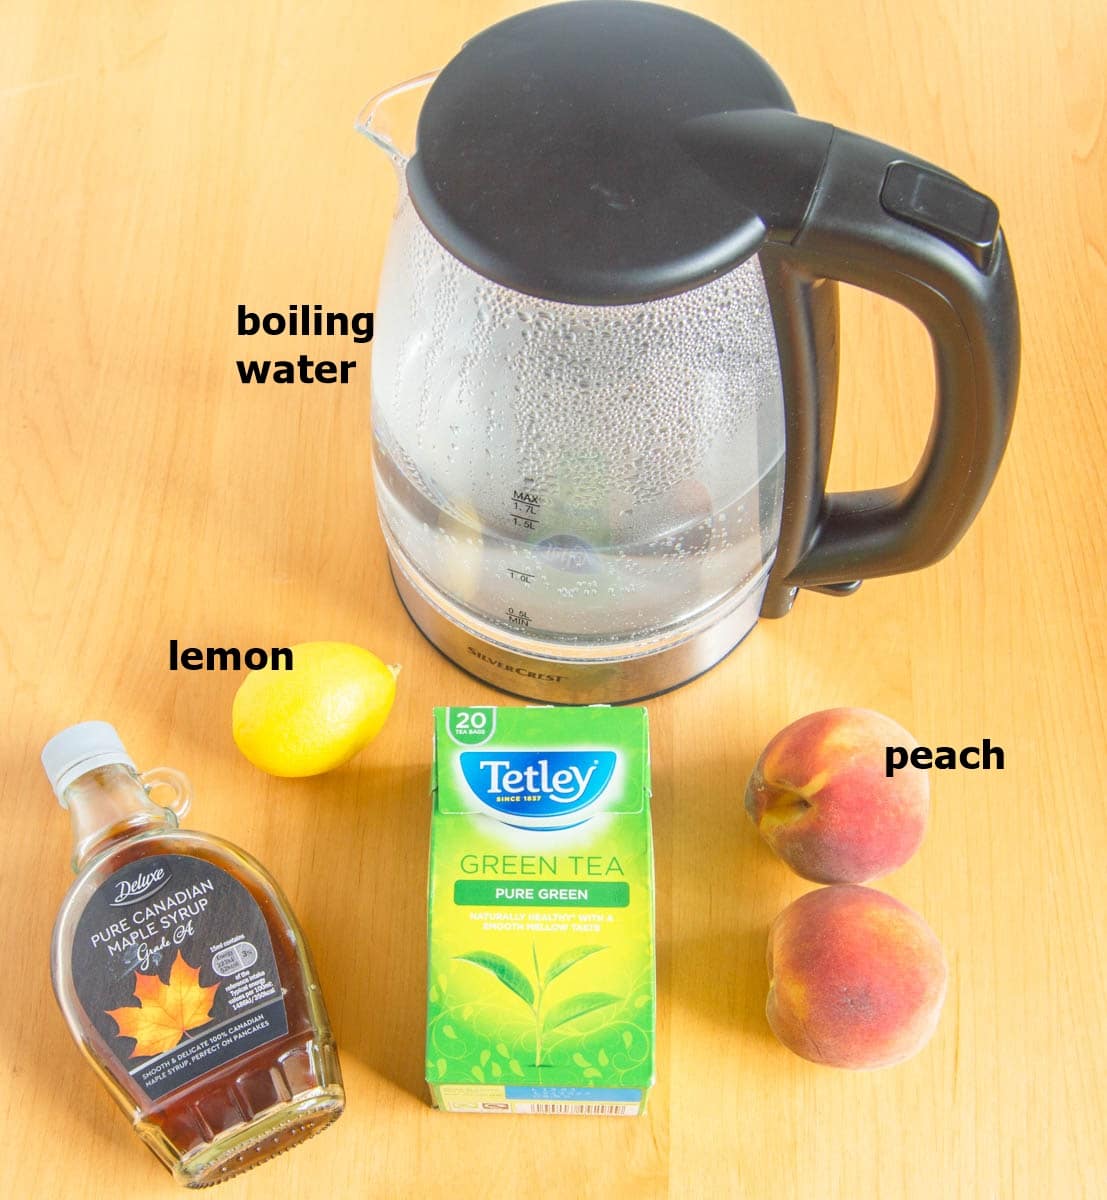 peaches, maple syrup, green tea bags, lemon and a kettle placed on a wooden table.